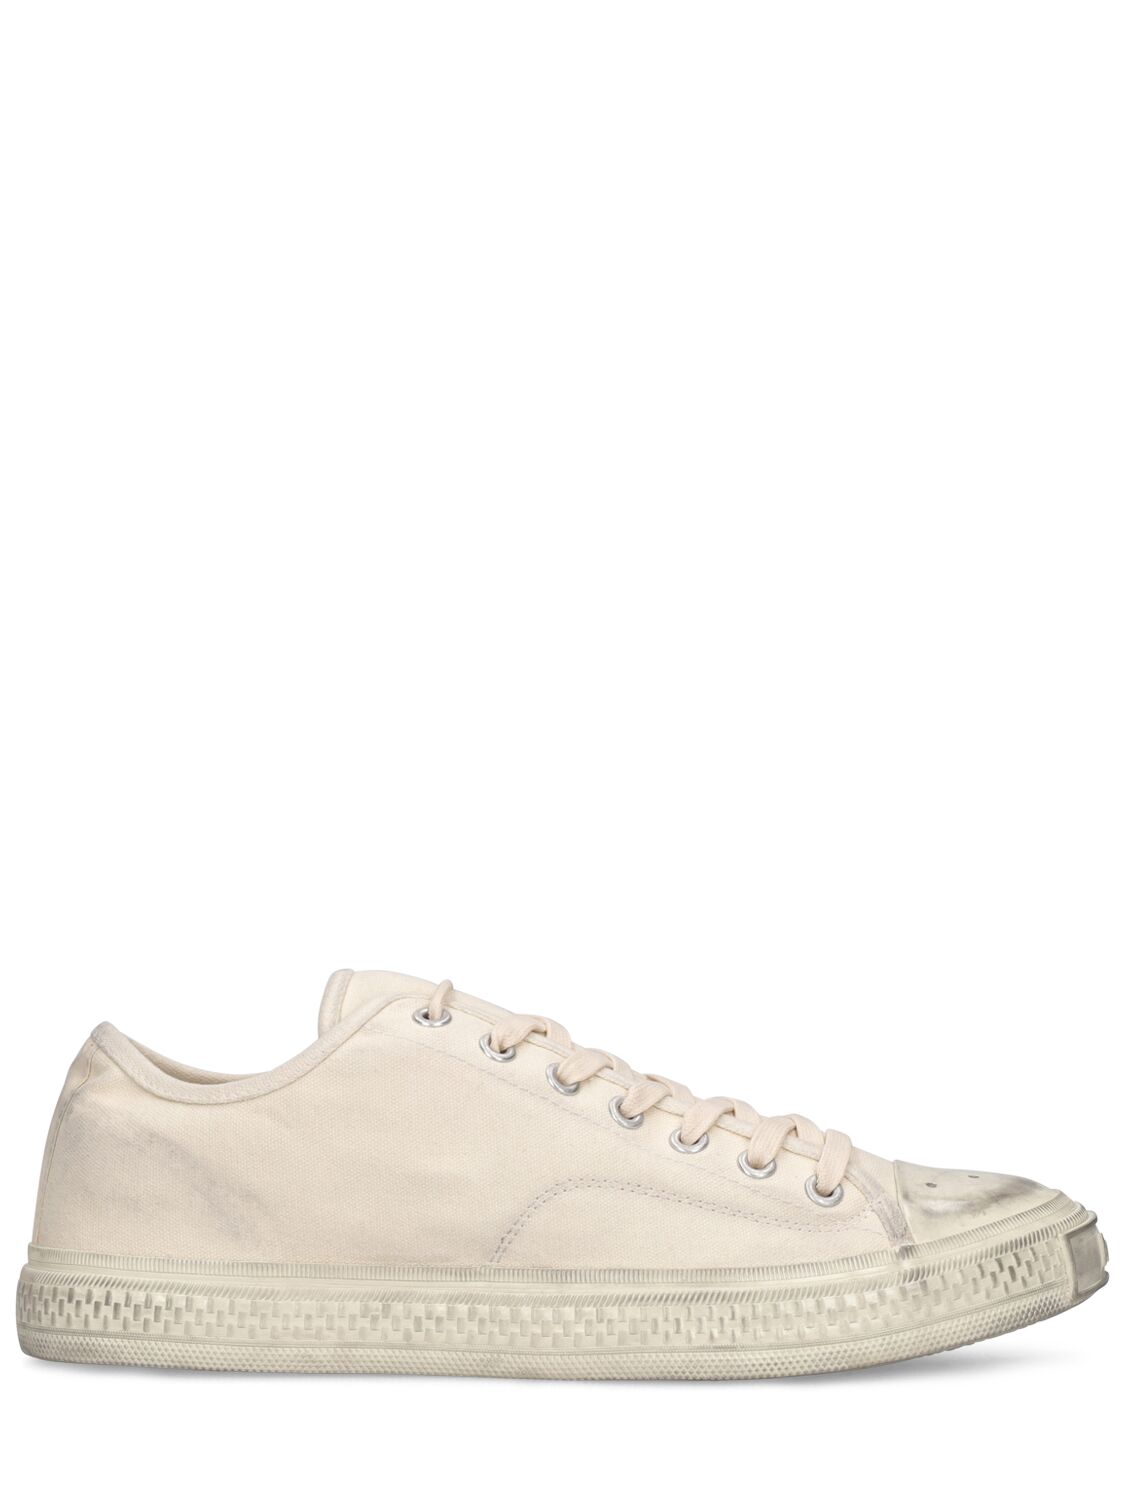 Acne Studios Ballow Soft Tumbled Cotton Sneakers In Off White